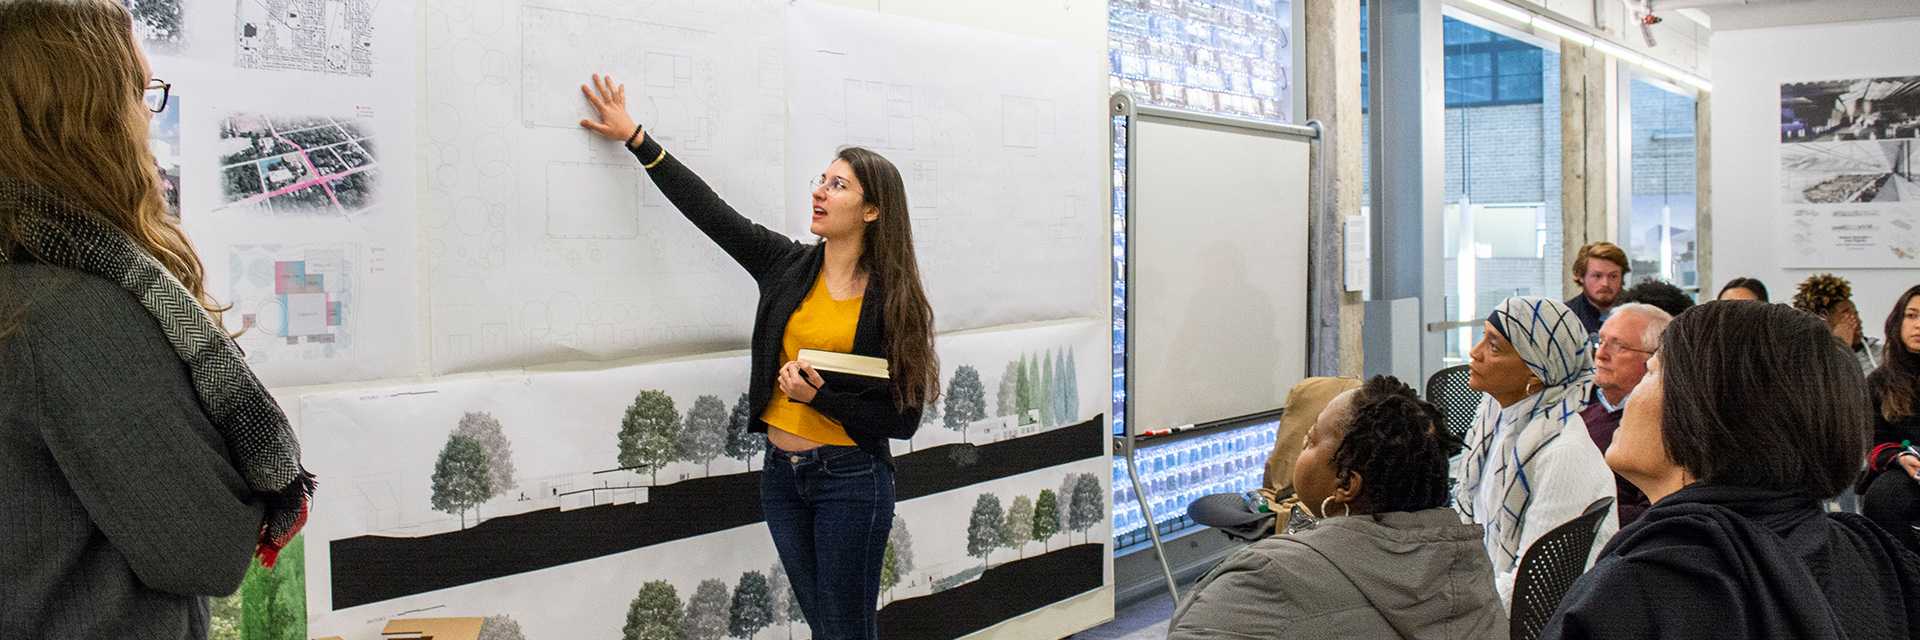 Students present their renderings during Junior and Senior Studio Presentations in the Hinman Research Building